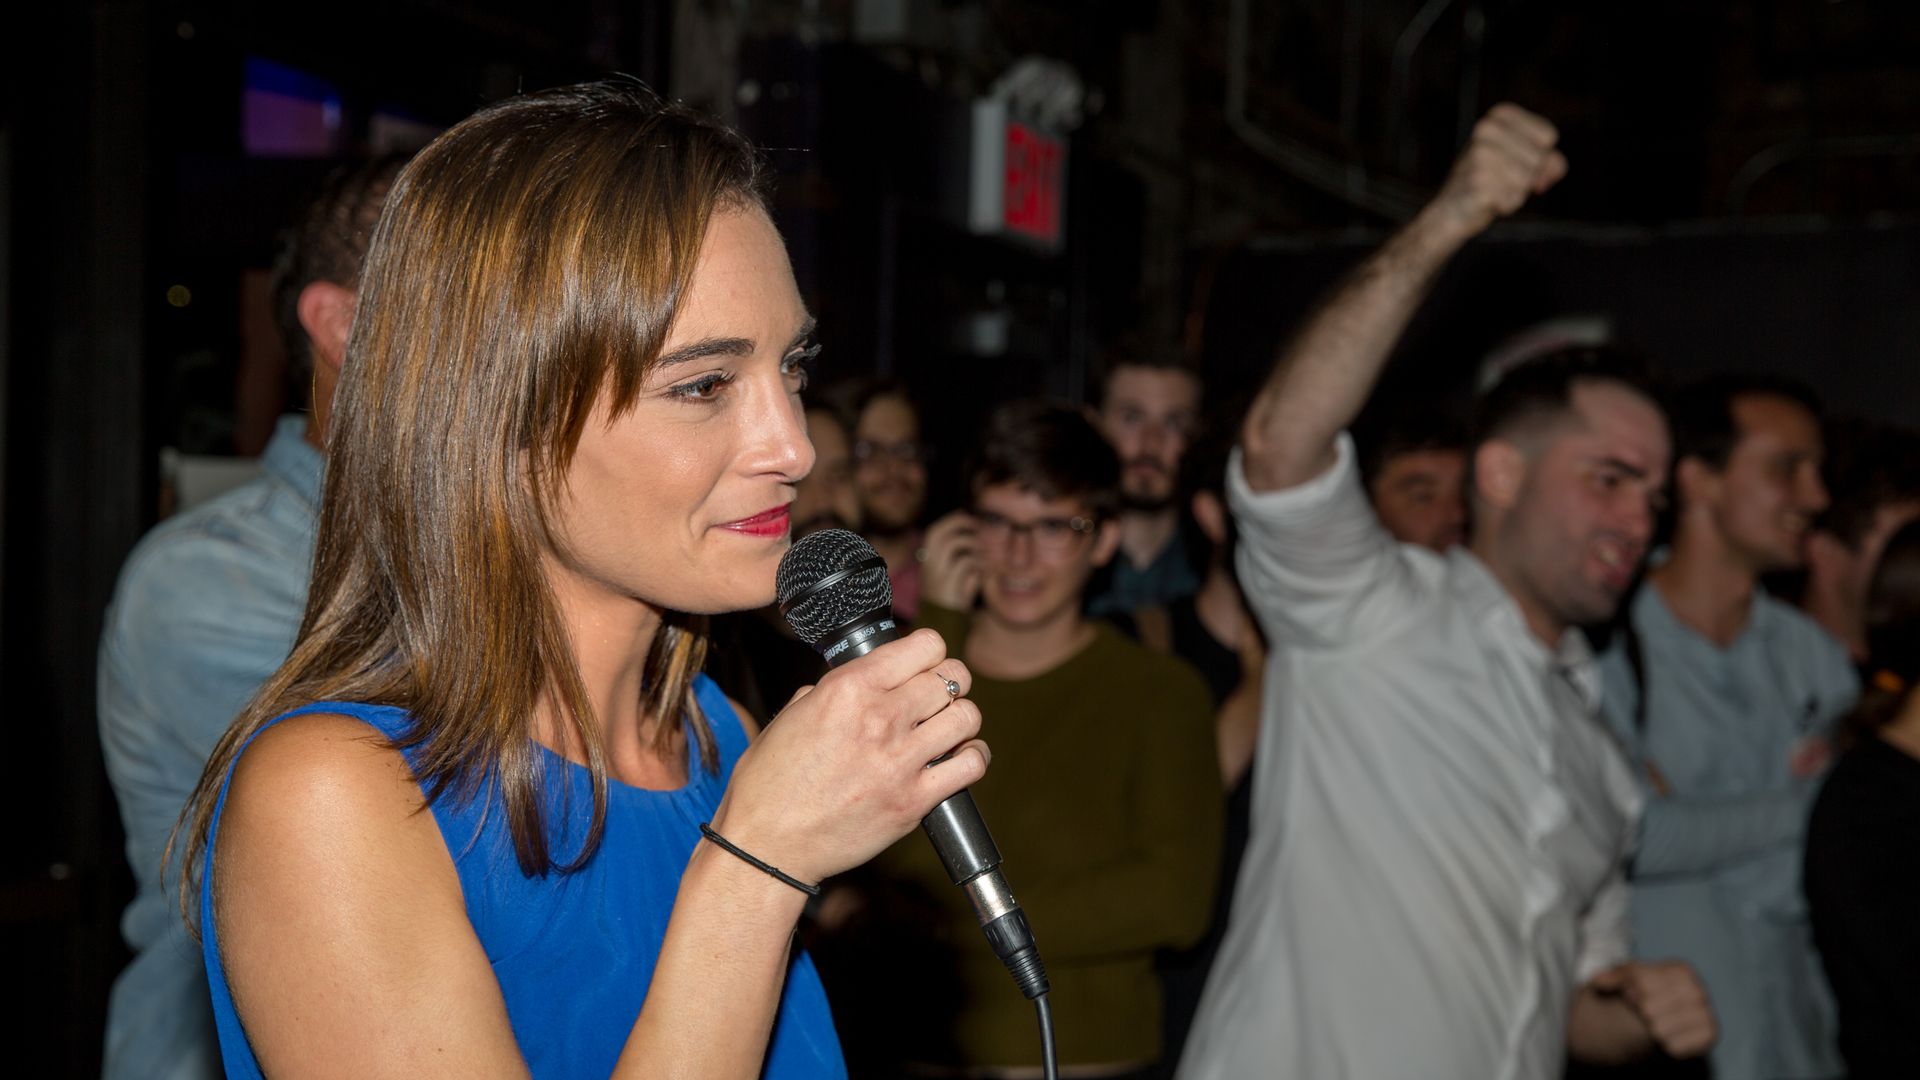 Democratic Socialist Julia Salazar, a  candidate for New York state Senate, delivers her victory speech. Photo: Scott Heins/Getty Images)